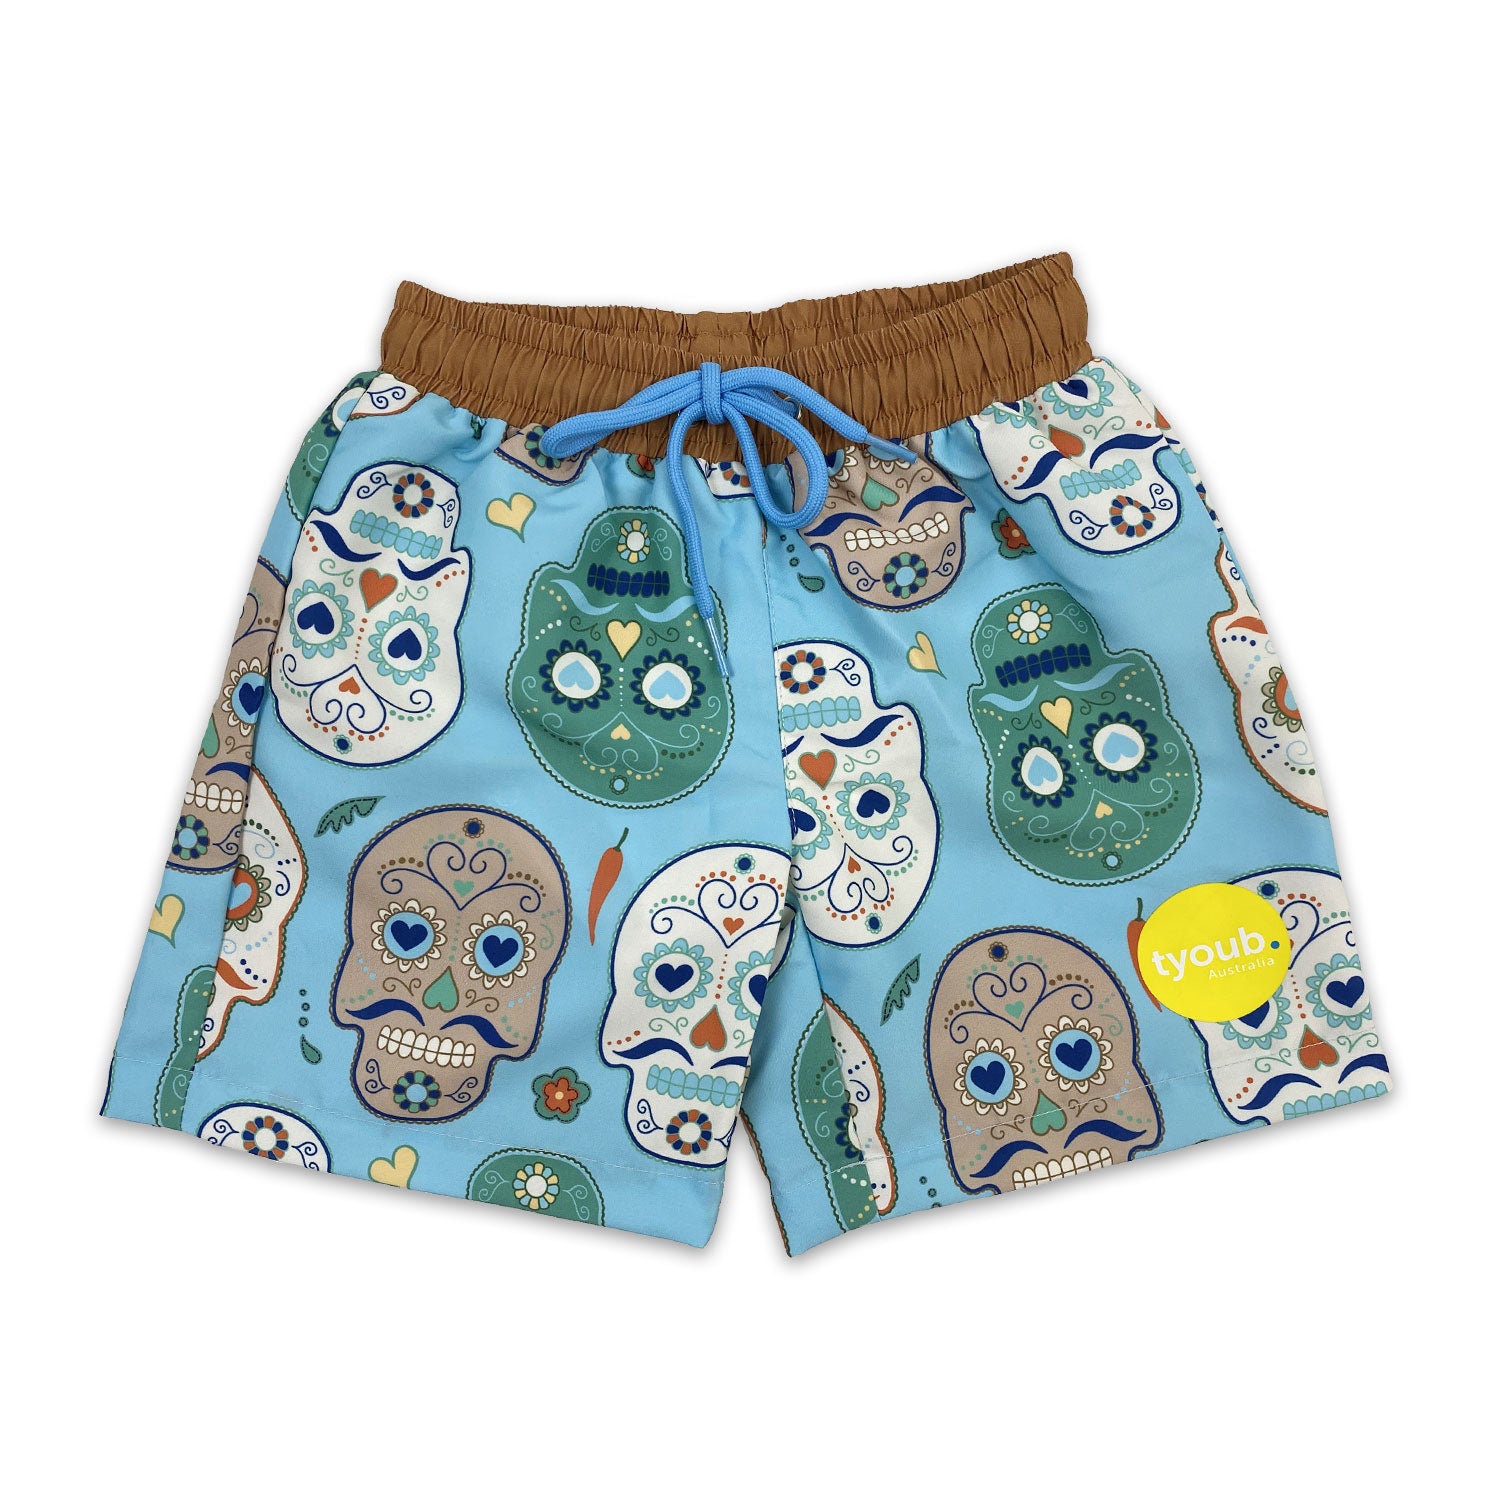 Tyoub Kids Quick Dry Board Short  Recycled Material Skulls Amigo